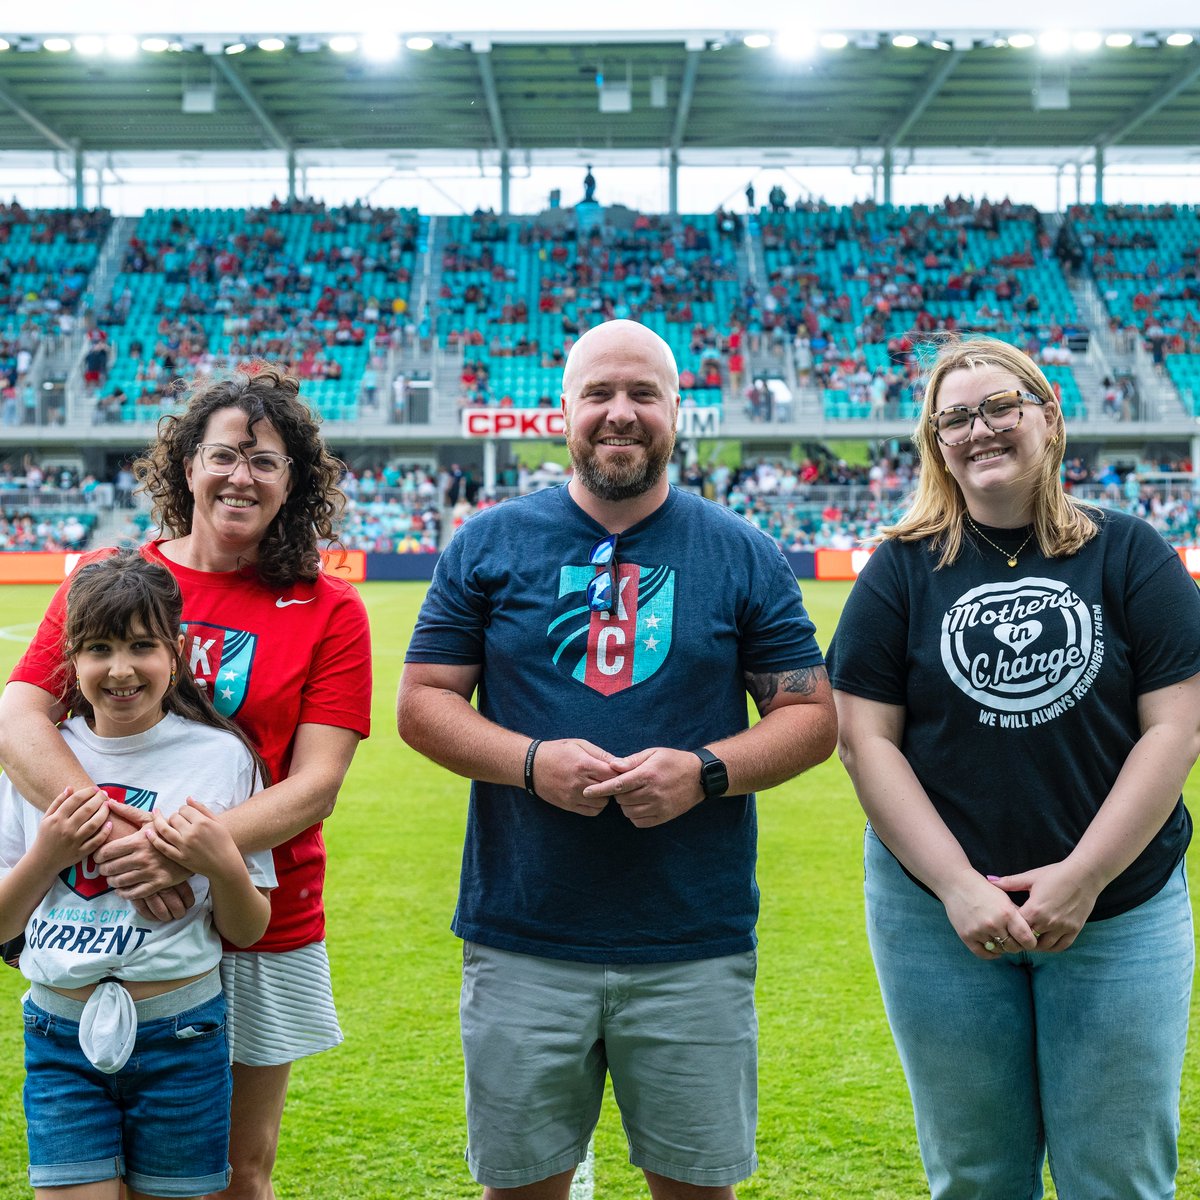 On Sunday we celebrated three nonprofit organizations who work relentlessly to support mothers in our community ❤️ It was our honor to recognize the @UnitedWayGKC Waymakers of the Match: @MothersRefuge, @TheSingleMOMkc and @KCMothersCharge. Thank you for your unwavering